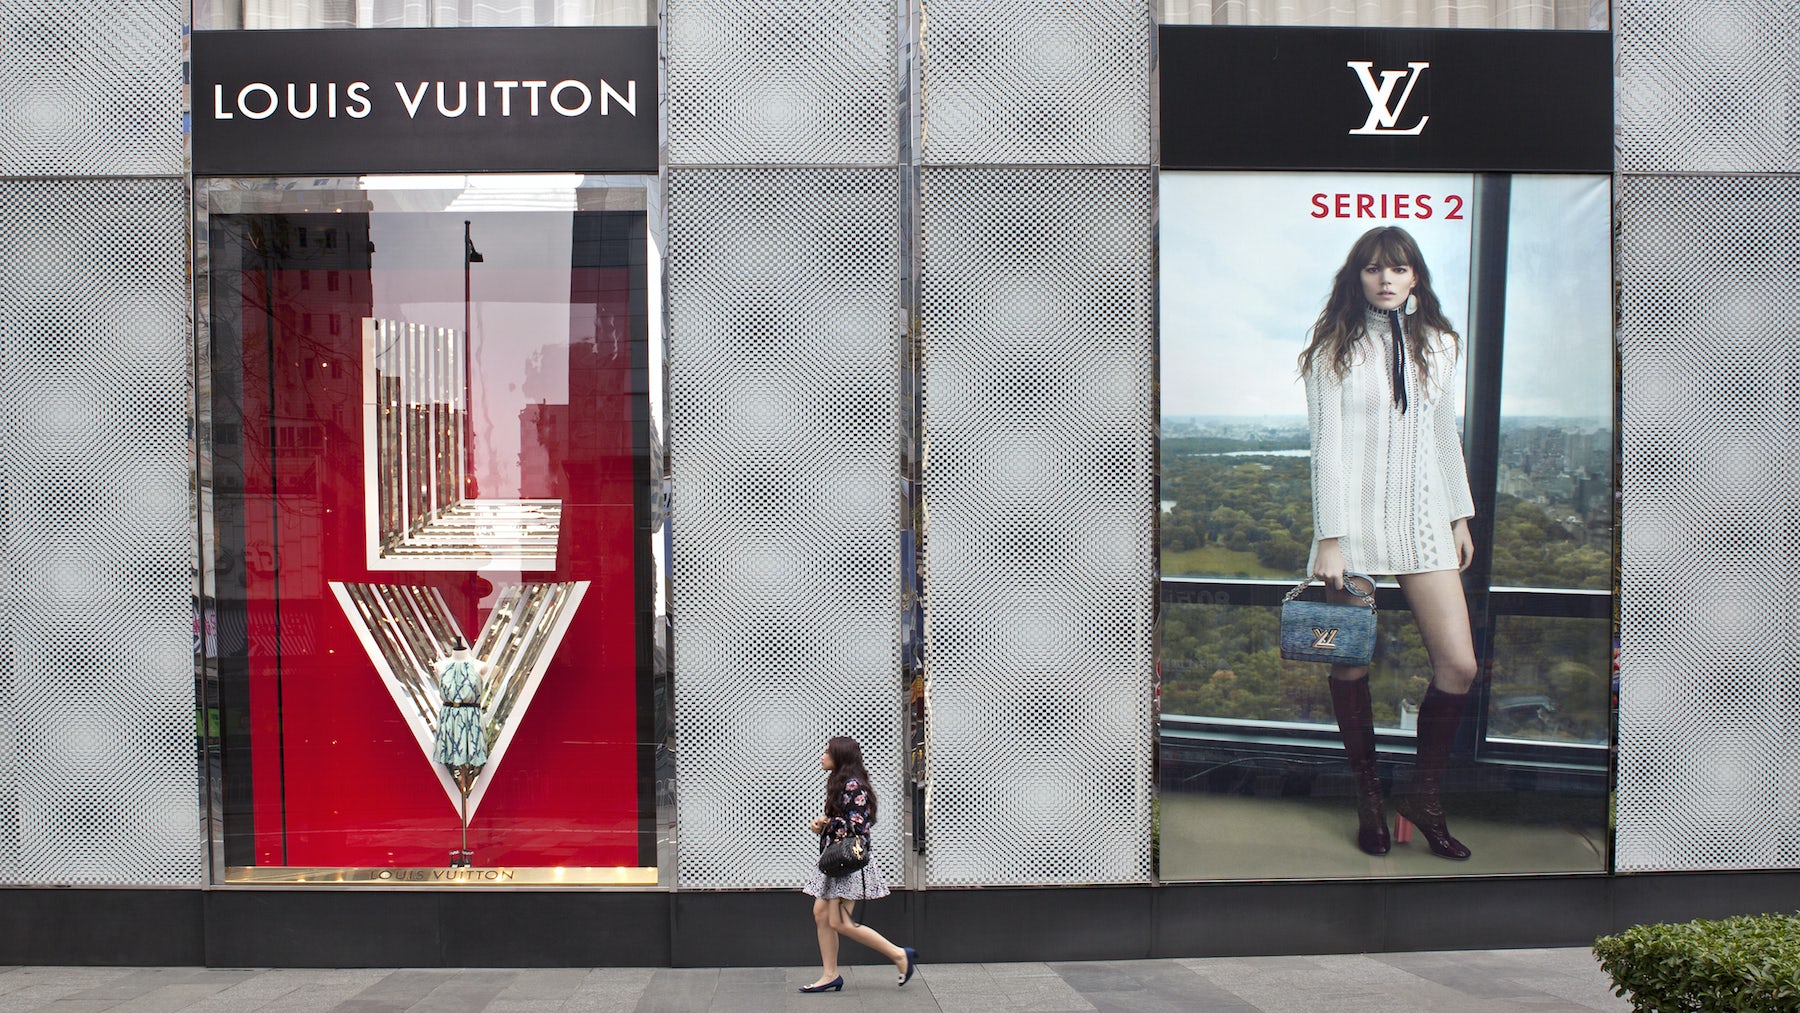 Michael Burke: why China is the future for Louis Vuitton